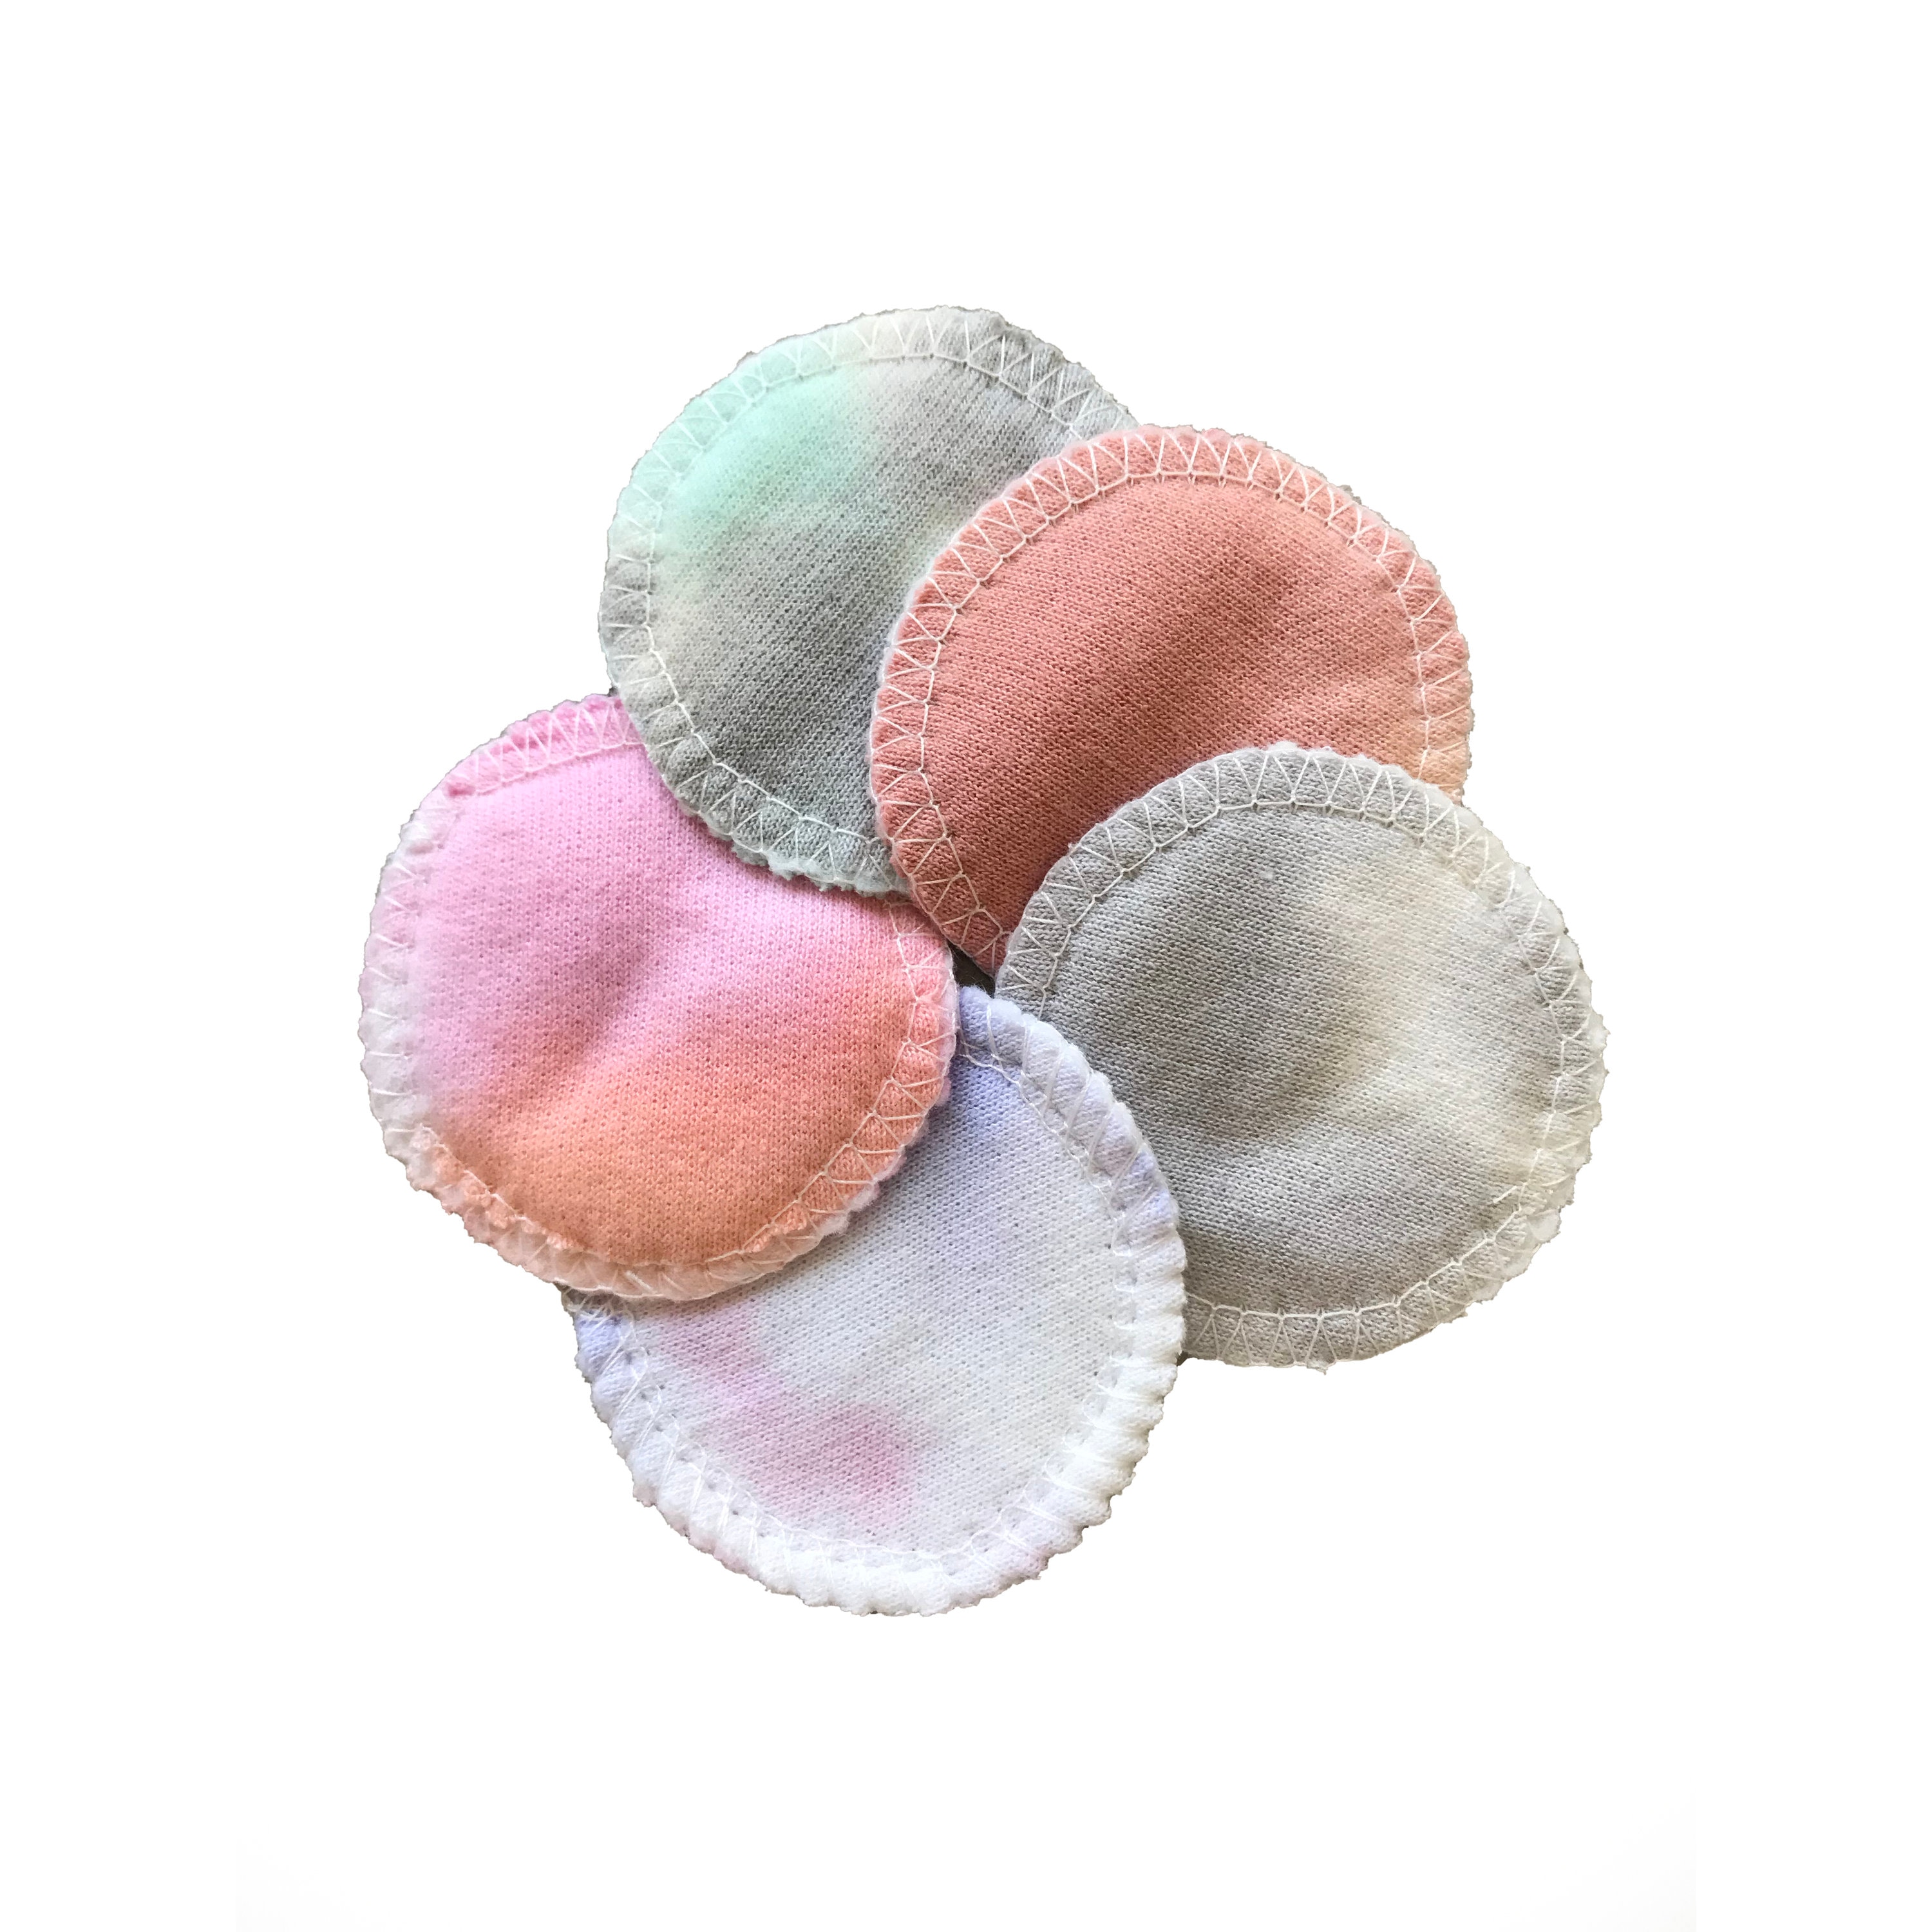 Makeup Pads 5 Pack Recycled Fabric Eye Makeup Etsy